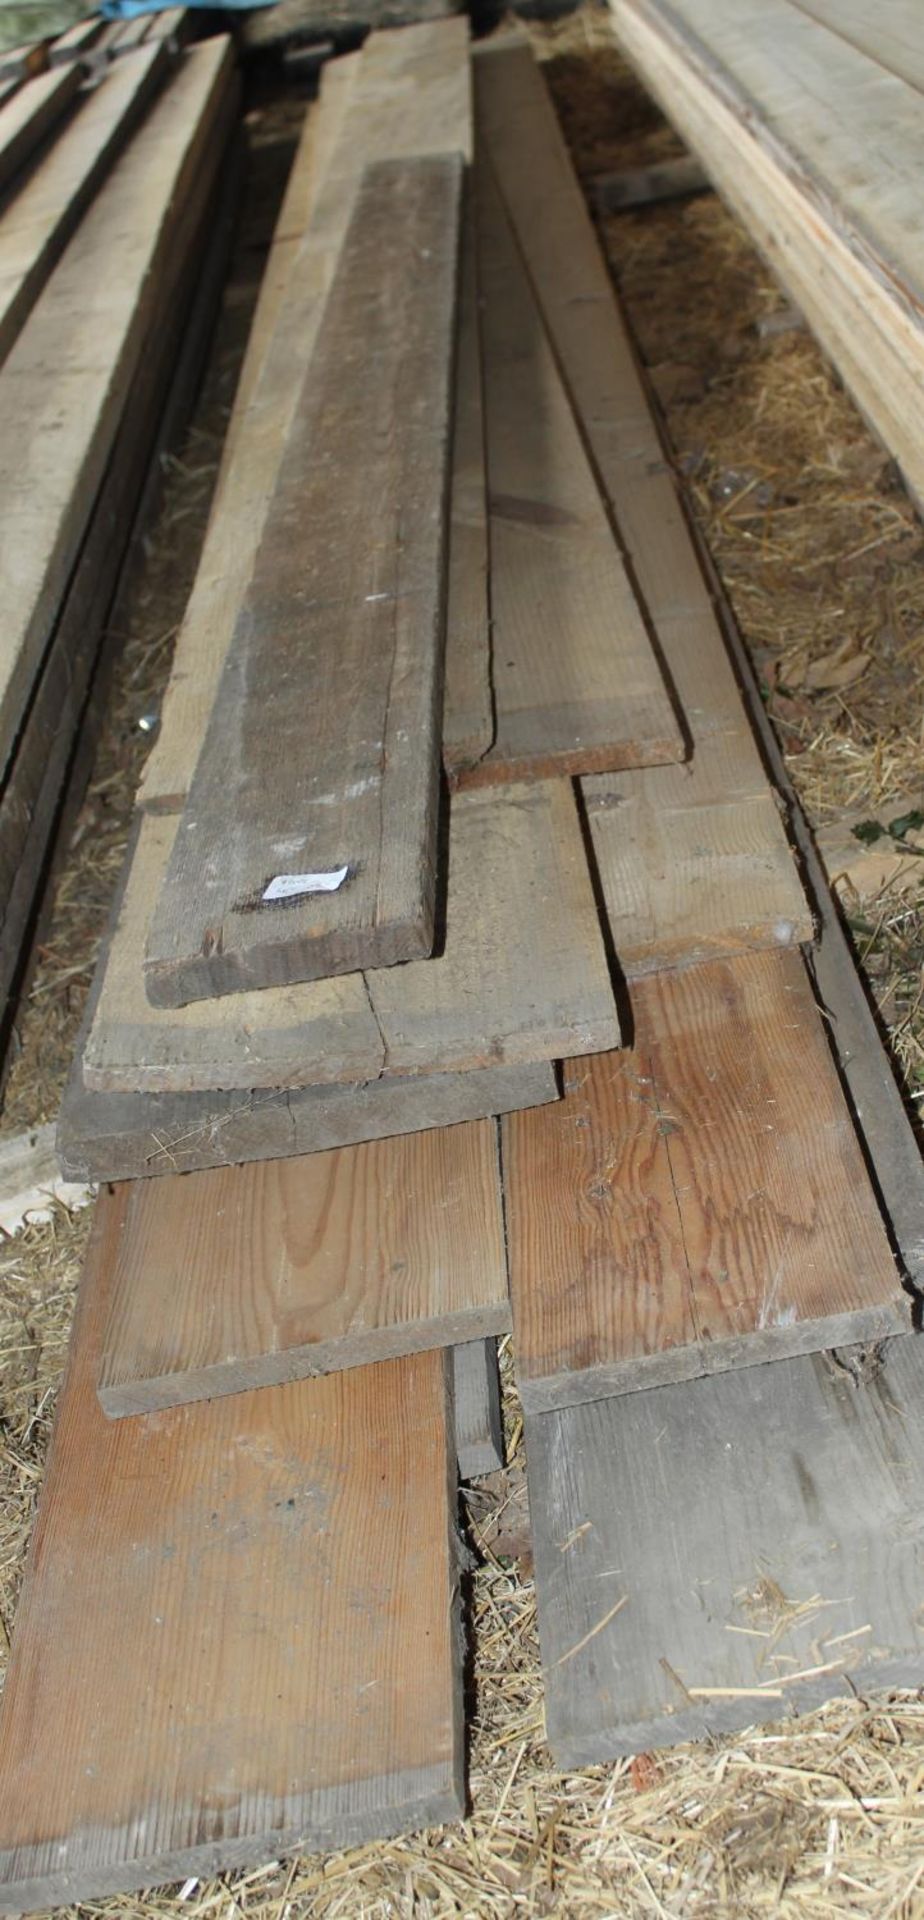 APPROXIMATELY SIXTY FLOOR BOARDS 53/4?8? AND 9? WIDE - Image 3 of 3